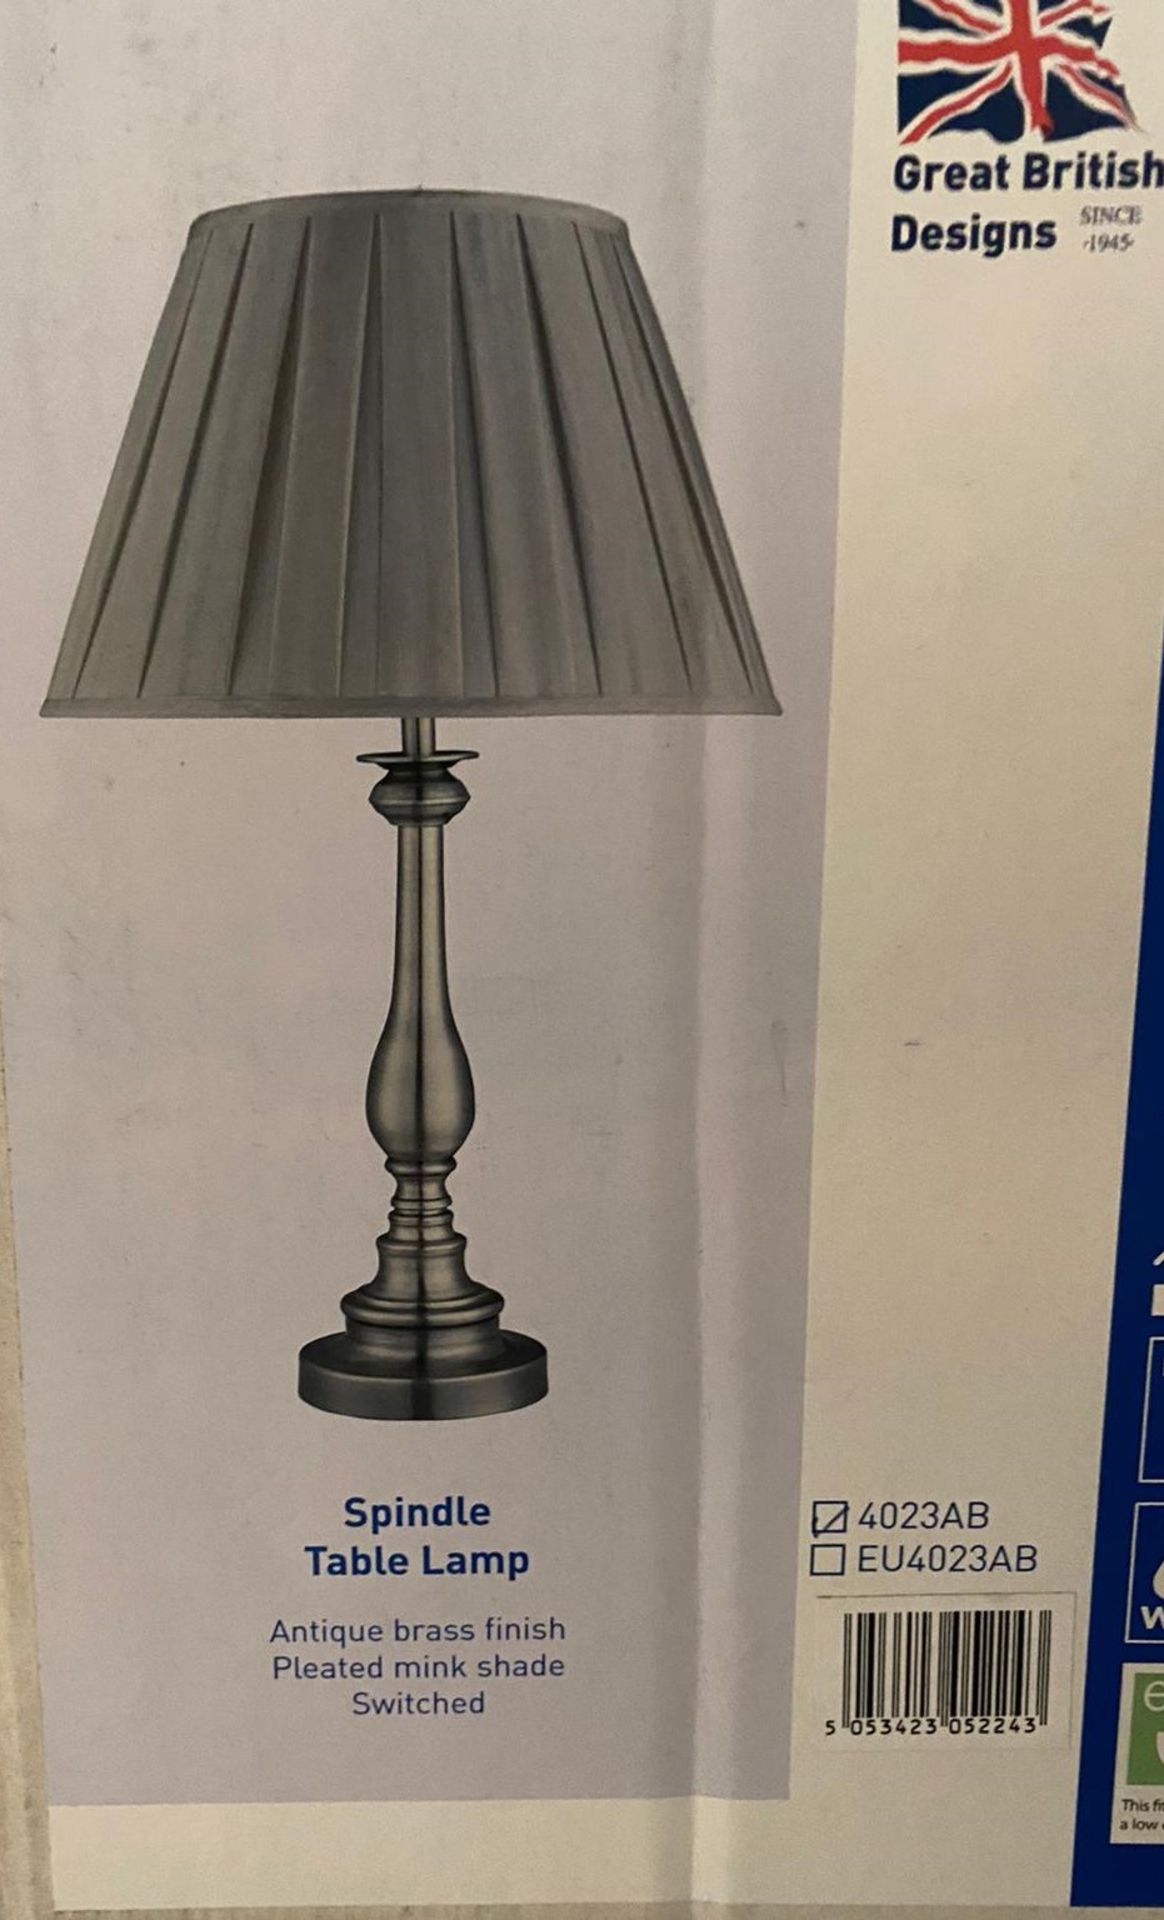 2 x Searchlight Spindle Table lamp in Antique Brass - Ref: 4023AB - New and Boxed - RRP: £80(each) - Image 3 of 4